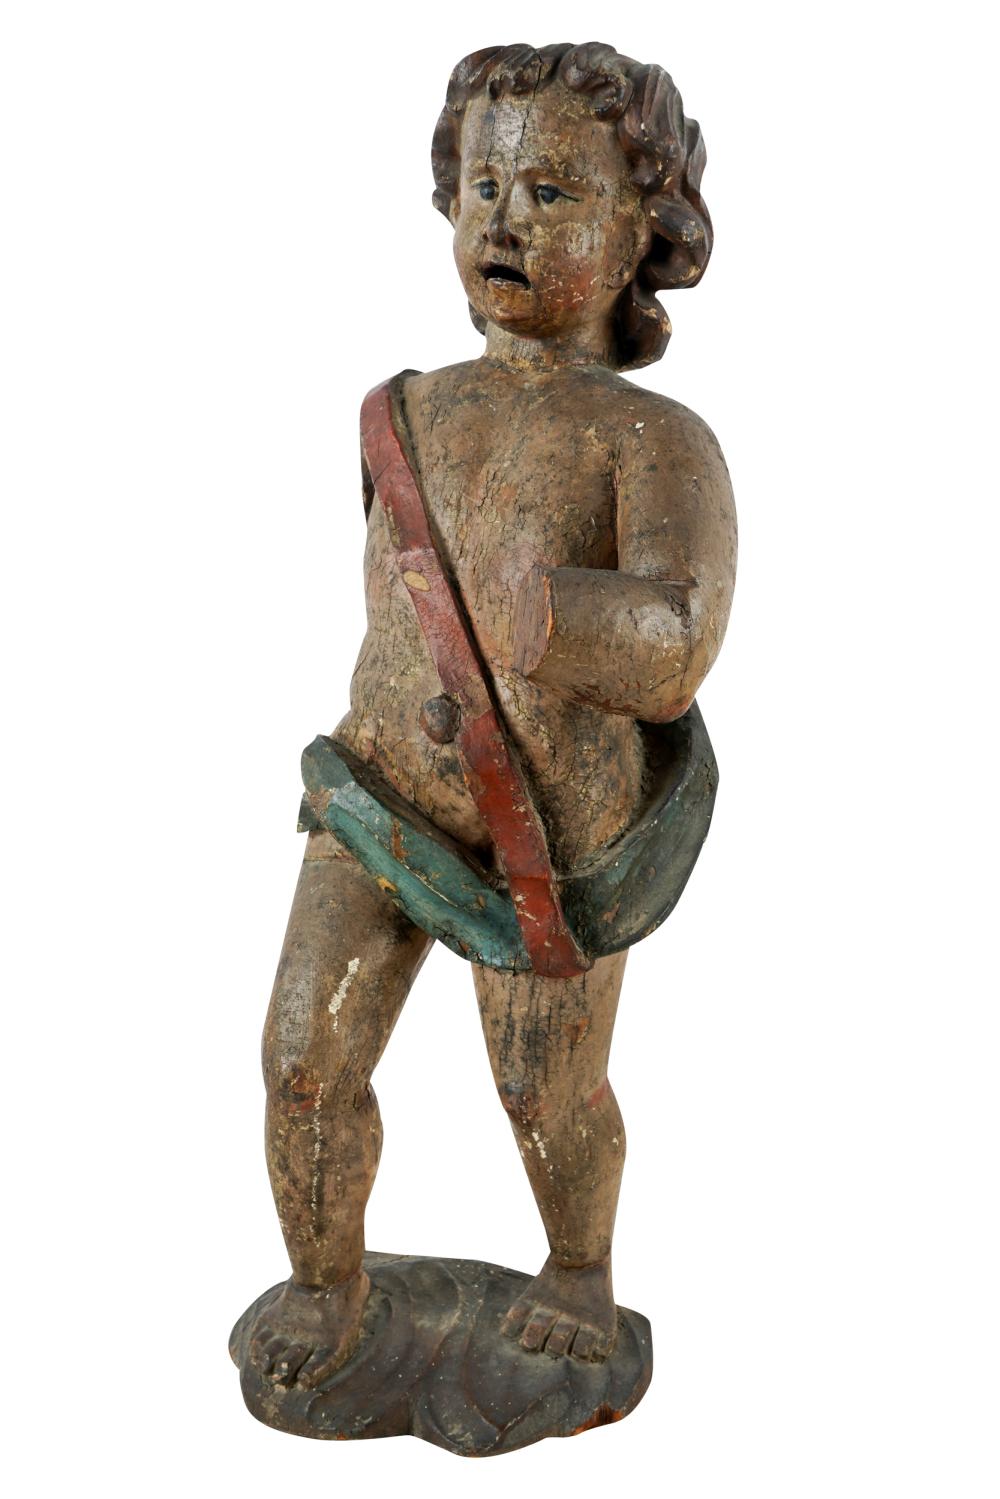 COLONIAL WOOD CARVED & POLYCHROME FIGURECondition: